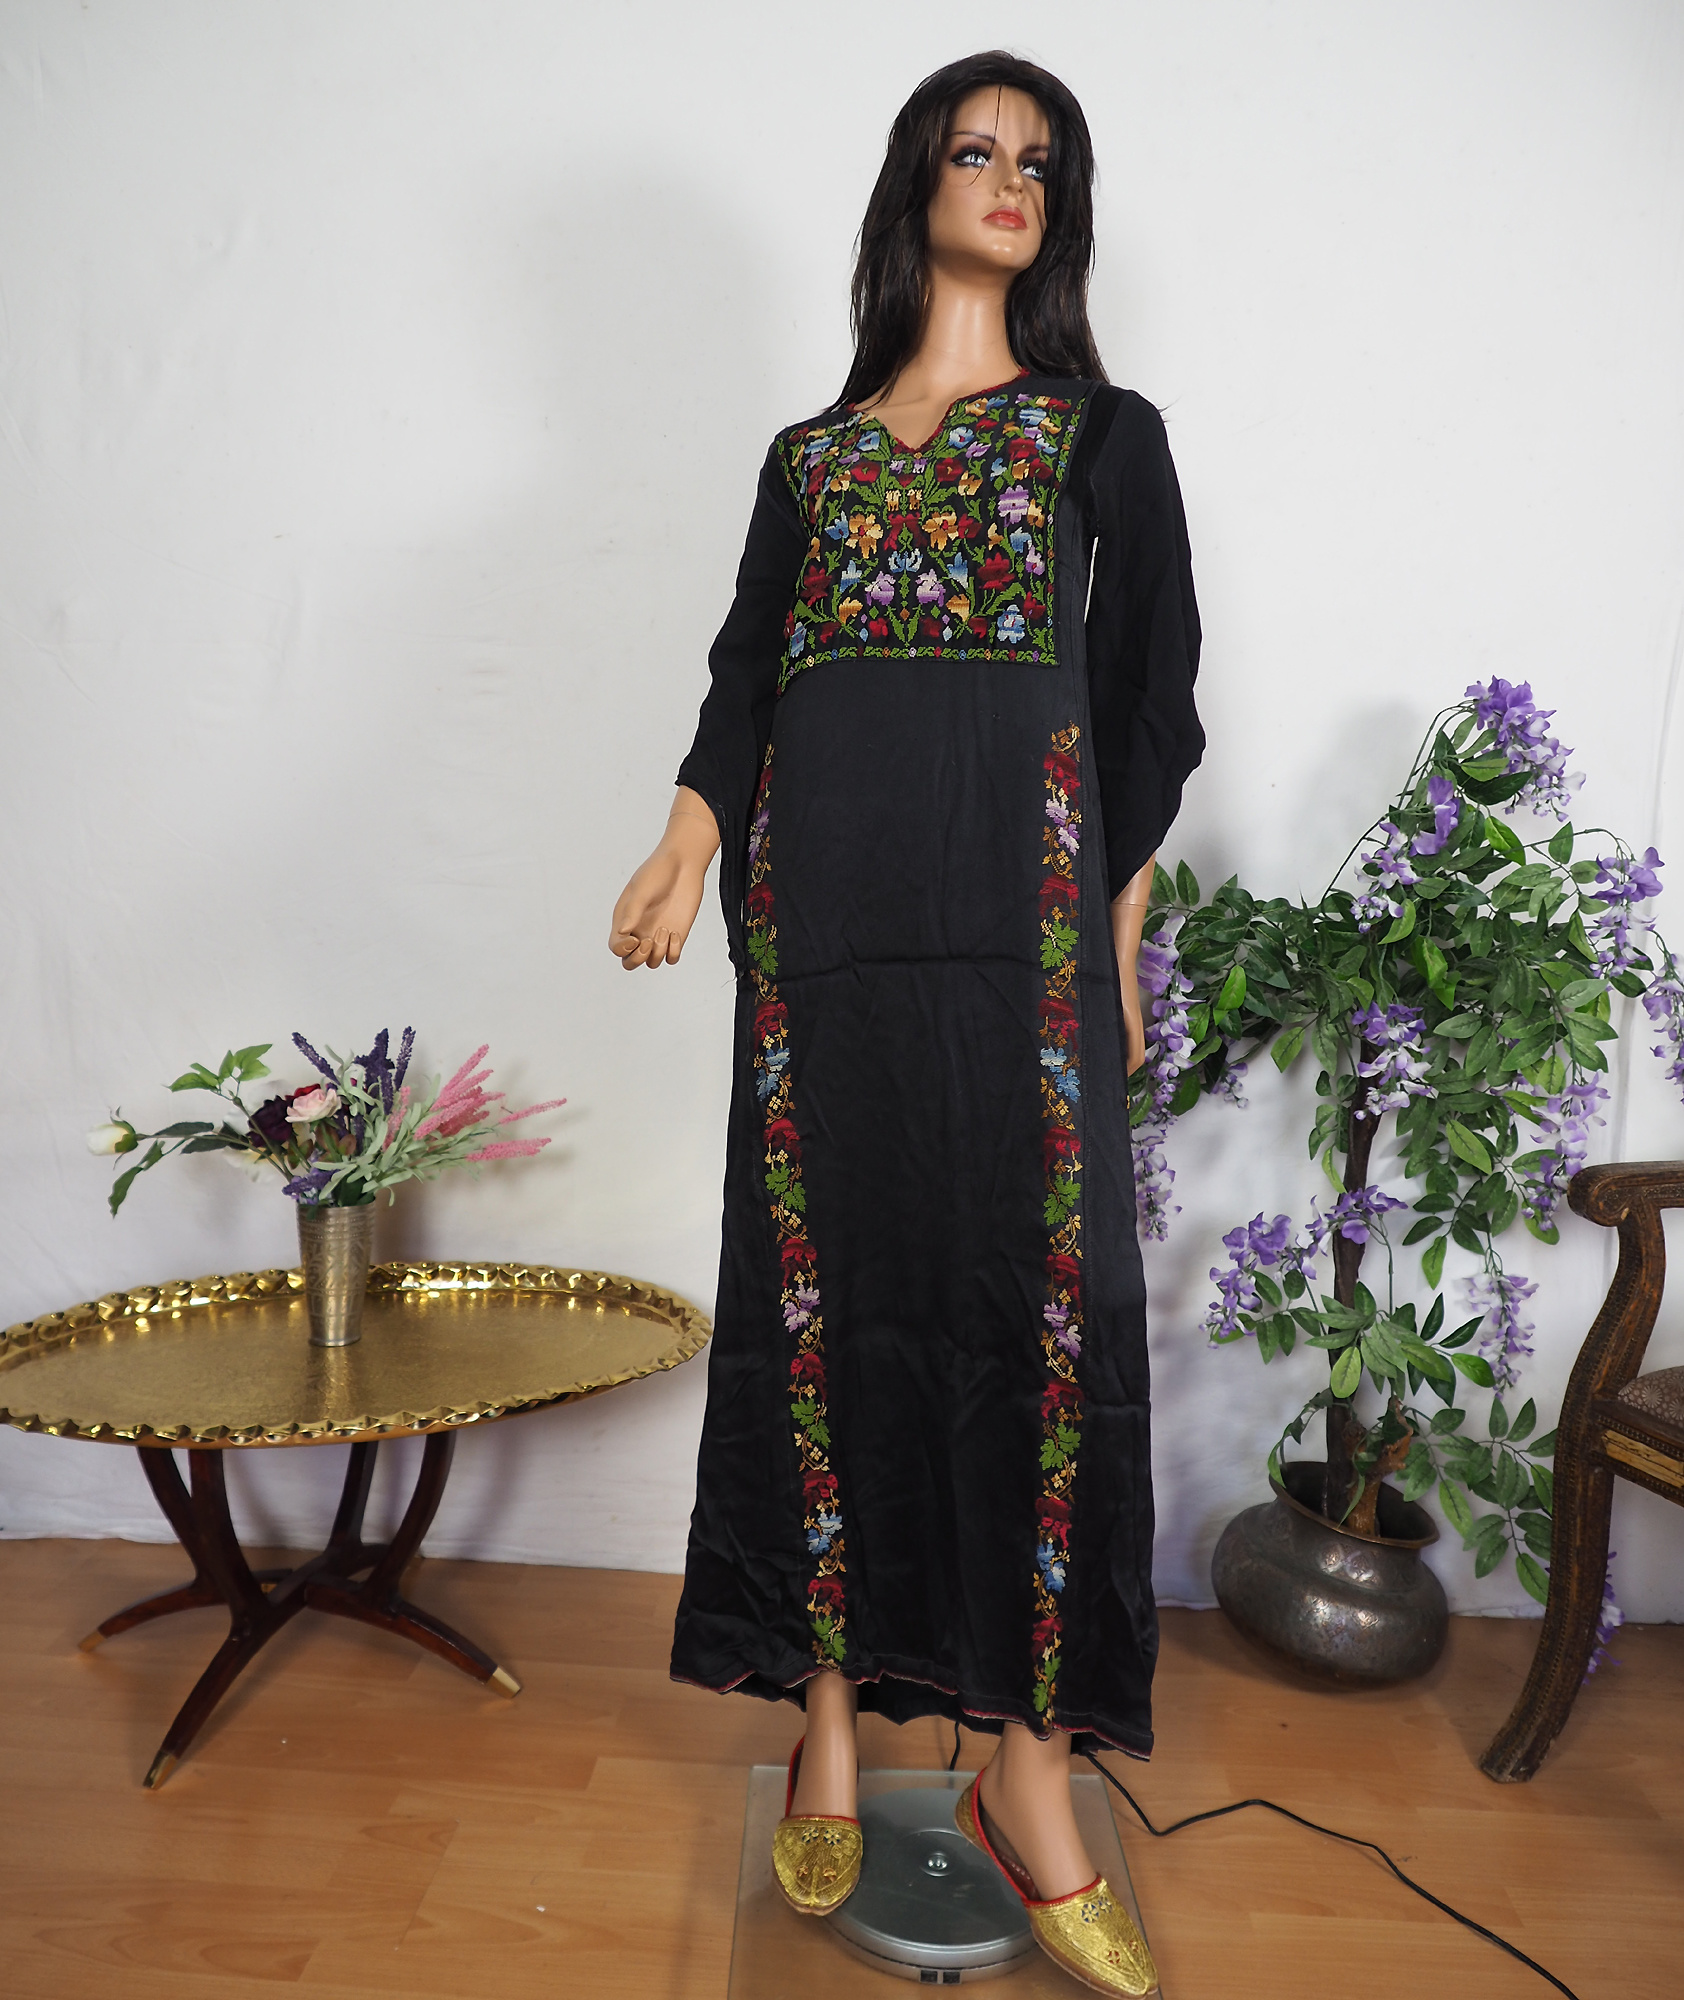 Palestinian girls embroidered ethnic dress No:1